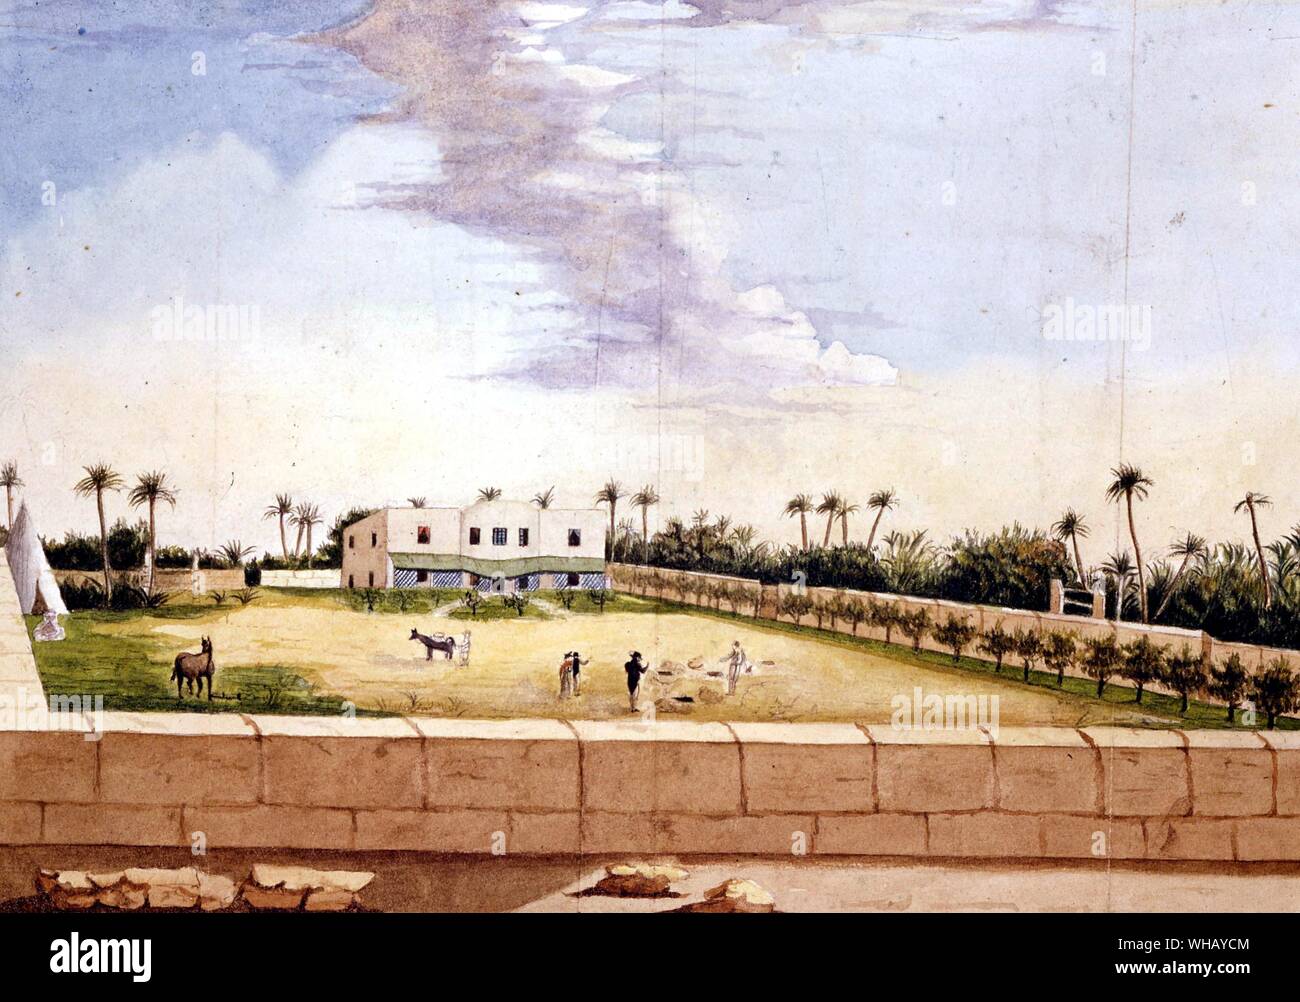 Consul Hanmer Warrington's country house near Tripoli, possibly painted by Warrington himself. The African Adventure - A History of Africa's Explorers by Timothy Severin, page 118. Stock Photo